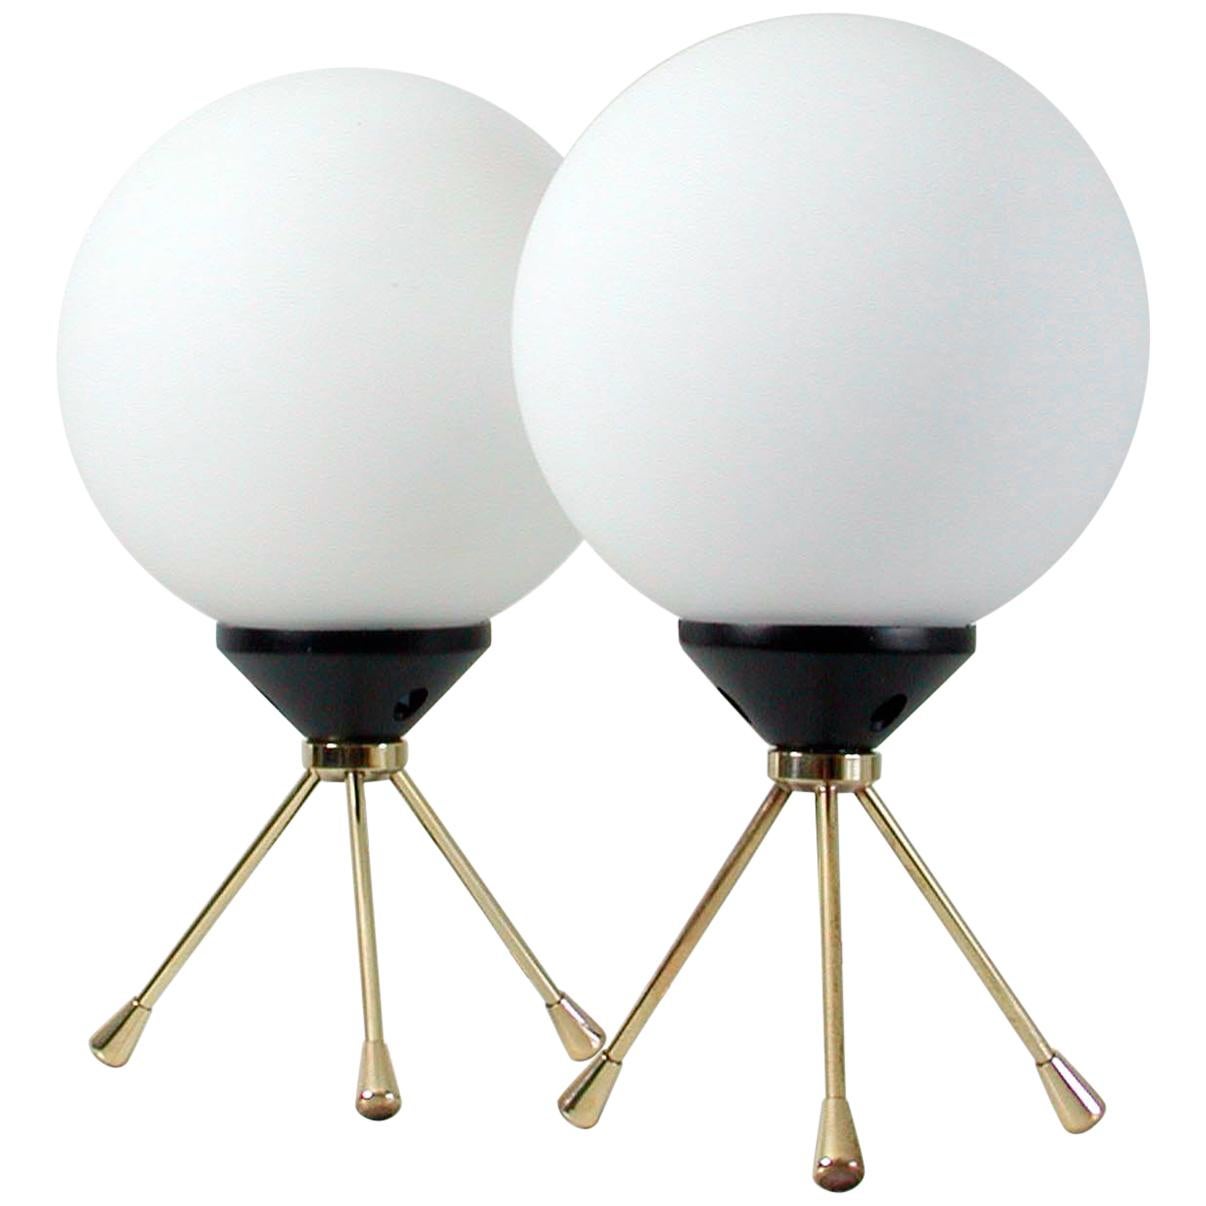 Midcentury Italian Brass and Opal Sputnik Table Lamps, Set of 2, 1950s